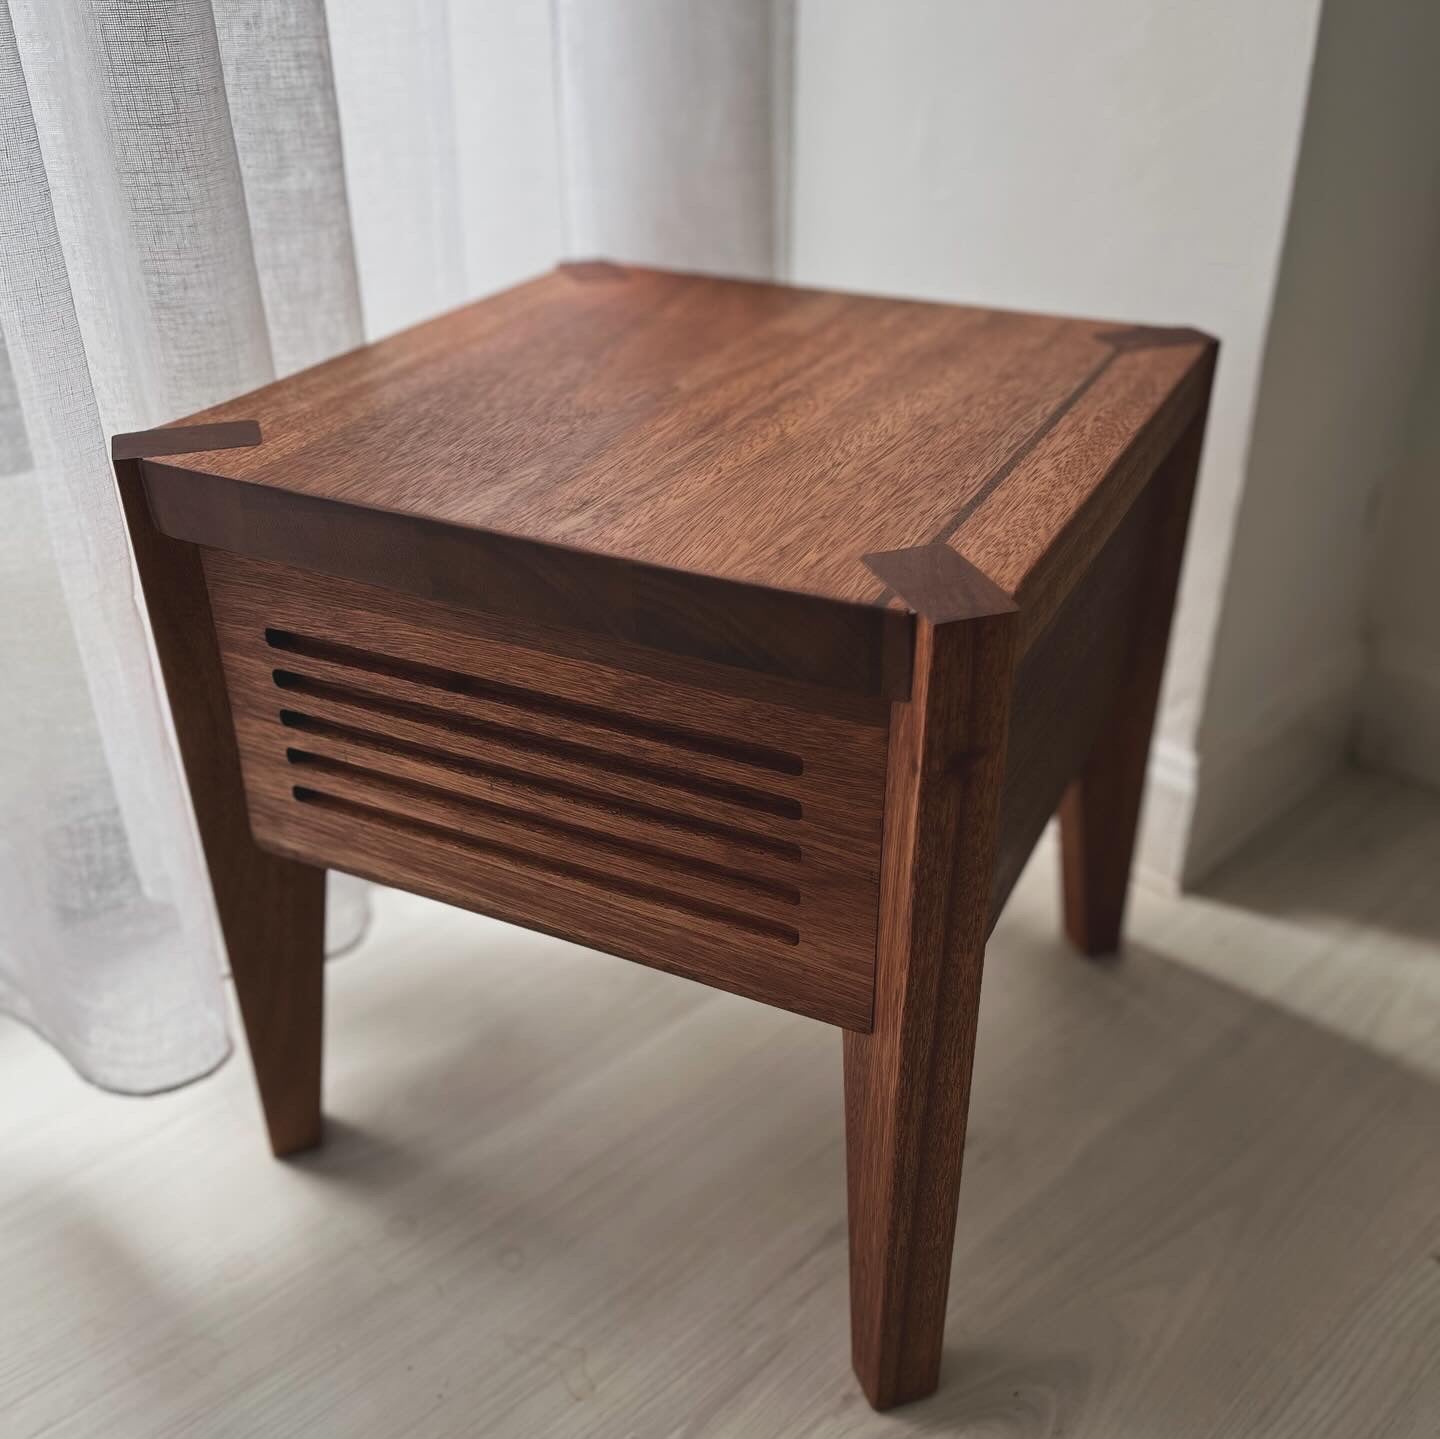 Thurlow side table